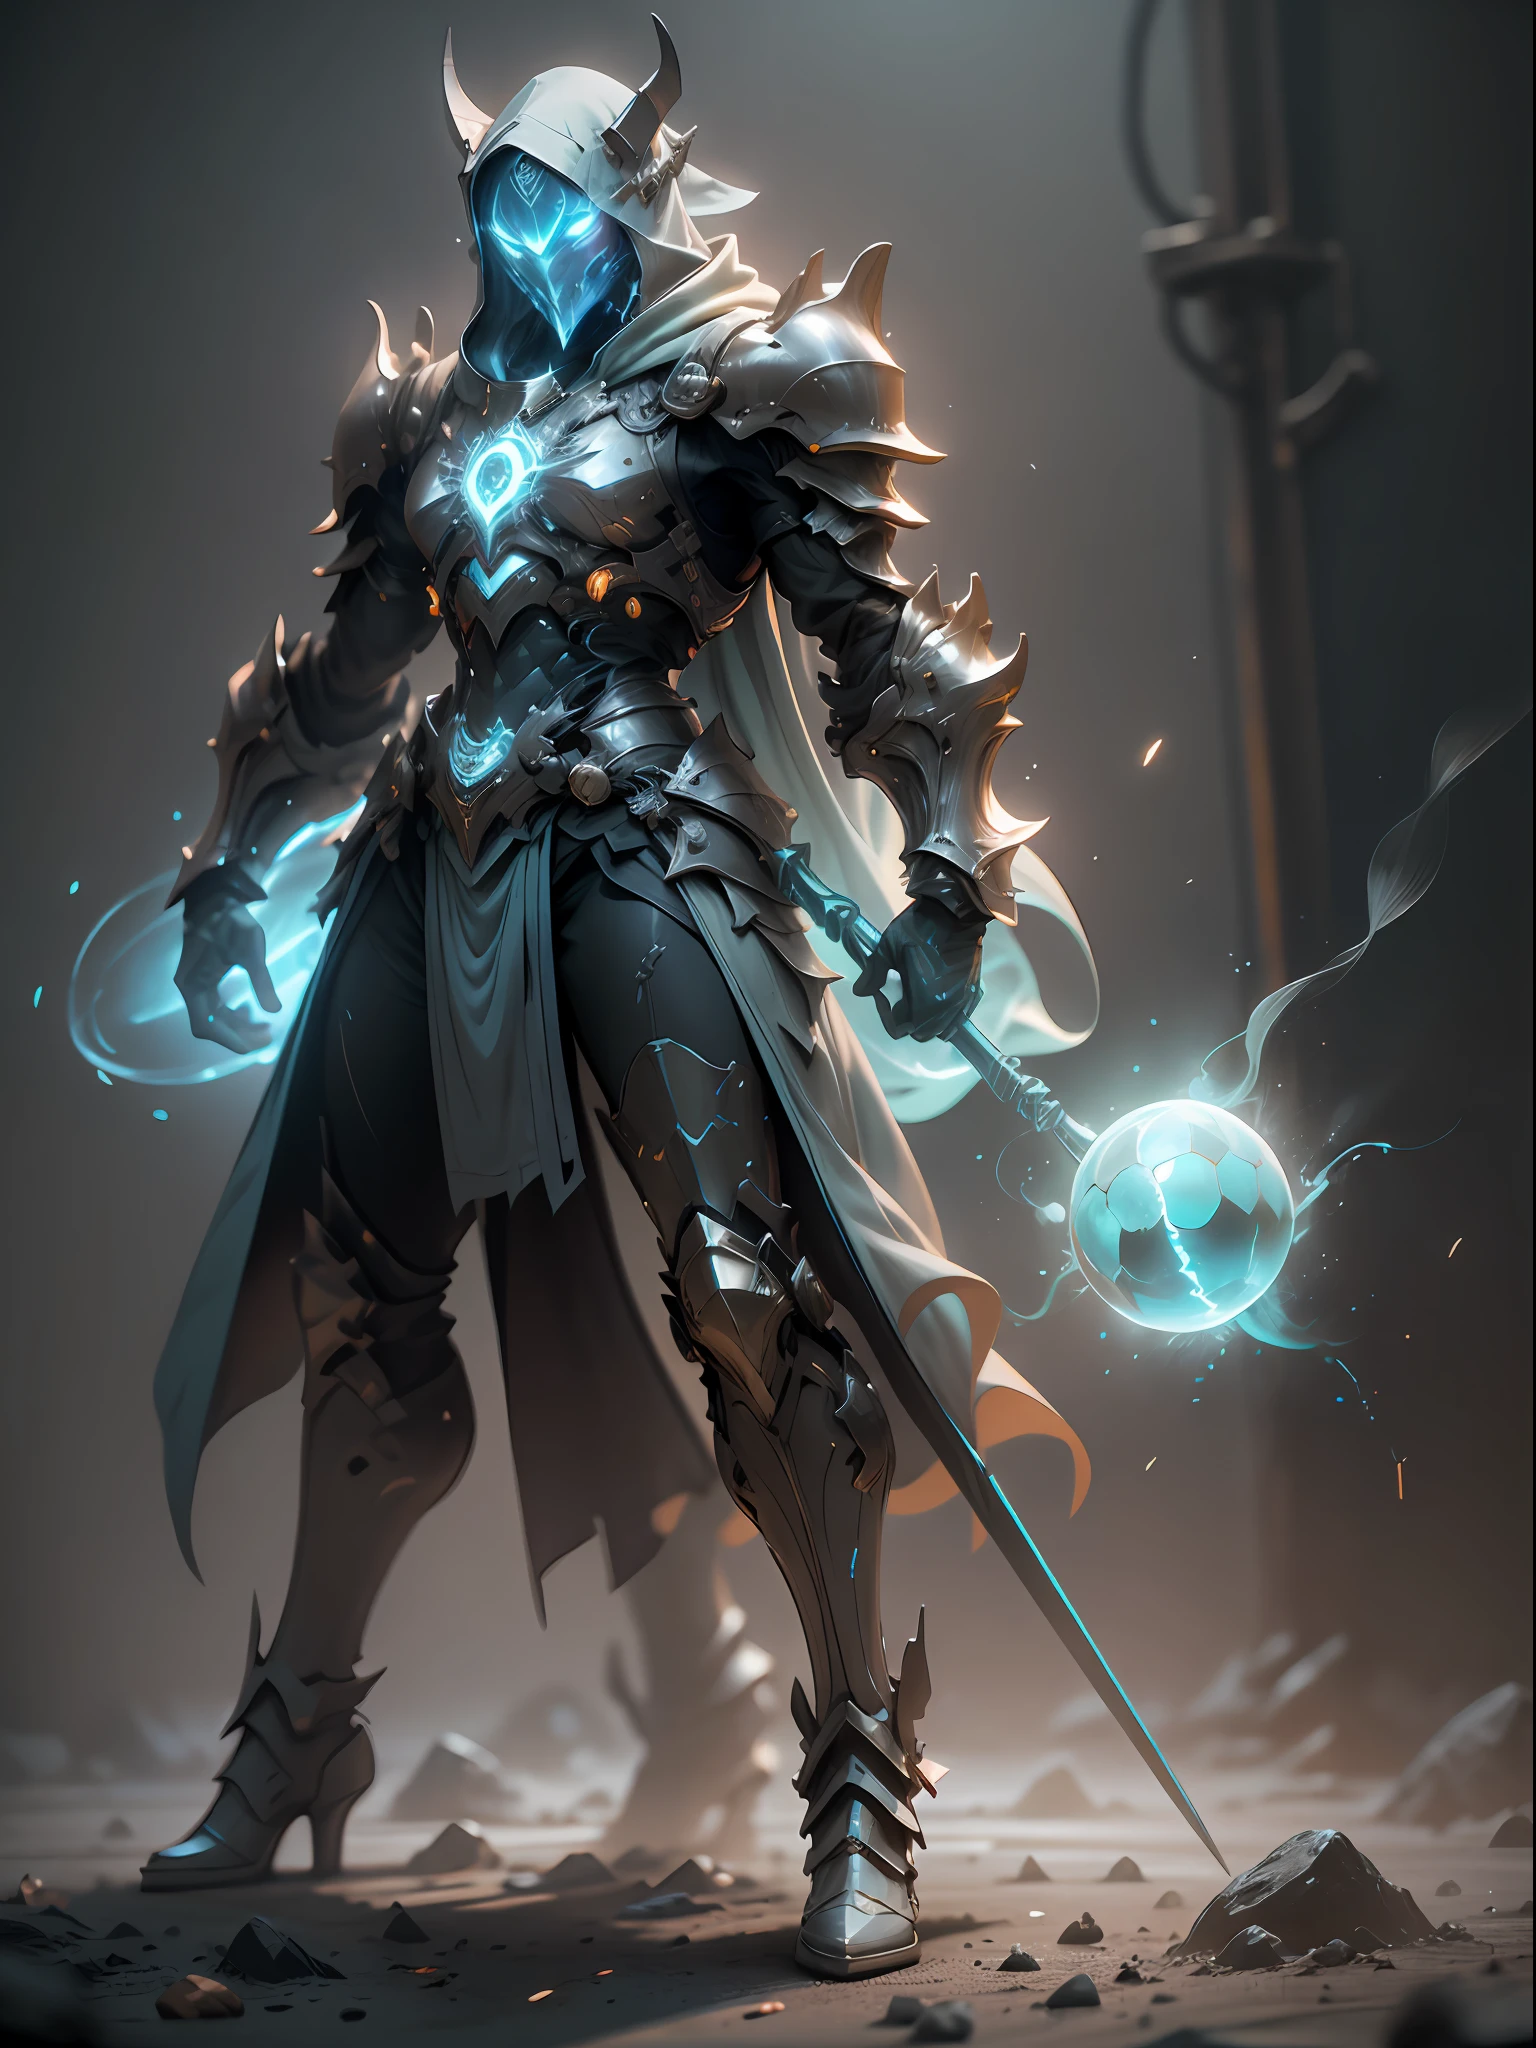 Ghost armor holding huge ice wand, mage, full body ice blue armor, super cool ghost mage, wearing ice blue cloak, huge staff, magic ball, magic casting pose, tall figure, glowing eyes, tall figure, perfect body proportions, super detail, IP by pop mart, edge light, avatar, octane rendering, blender, full body, clean black background, 3d, c4d, best quality, very detailed, ancient technology, HDR (high dynamic range), Ray Tracing, NVIDIA RTX, Super Resolution, Unreal 5, Subsurface Scattering, PBR Textures, Post-Processing, Anisotropic Filtering, Depth of Field, Maximum Sharpness and Acutance, Multi-layer Textures, Albedo and Highlight Maps, Surface Shading, Accurate Simulation of Light-Material Interactions, Perfect Proportions, Octane Rendering, Two-tone Lighting, Low ISO, White Balance, Rule of Thirds, Wide Aperture, 8K RAW, High Efficiency Sub-Pixel, Subpixel Convolution, Luminous Particles, Light Scattering, Tyndall Effect